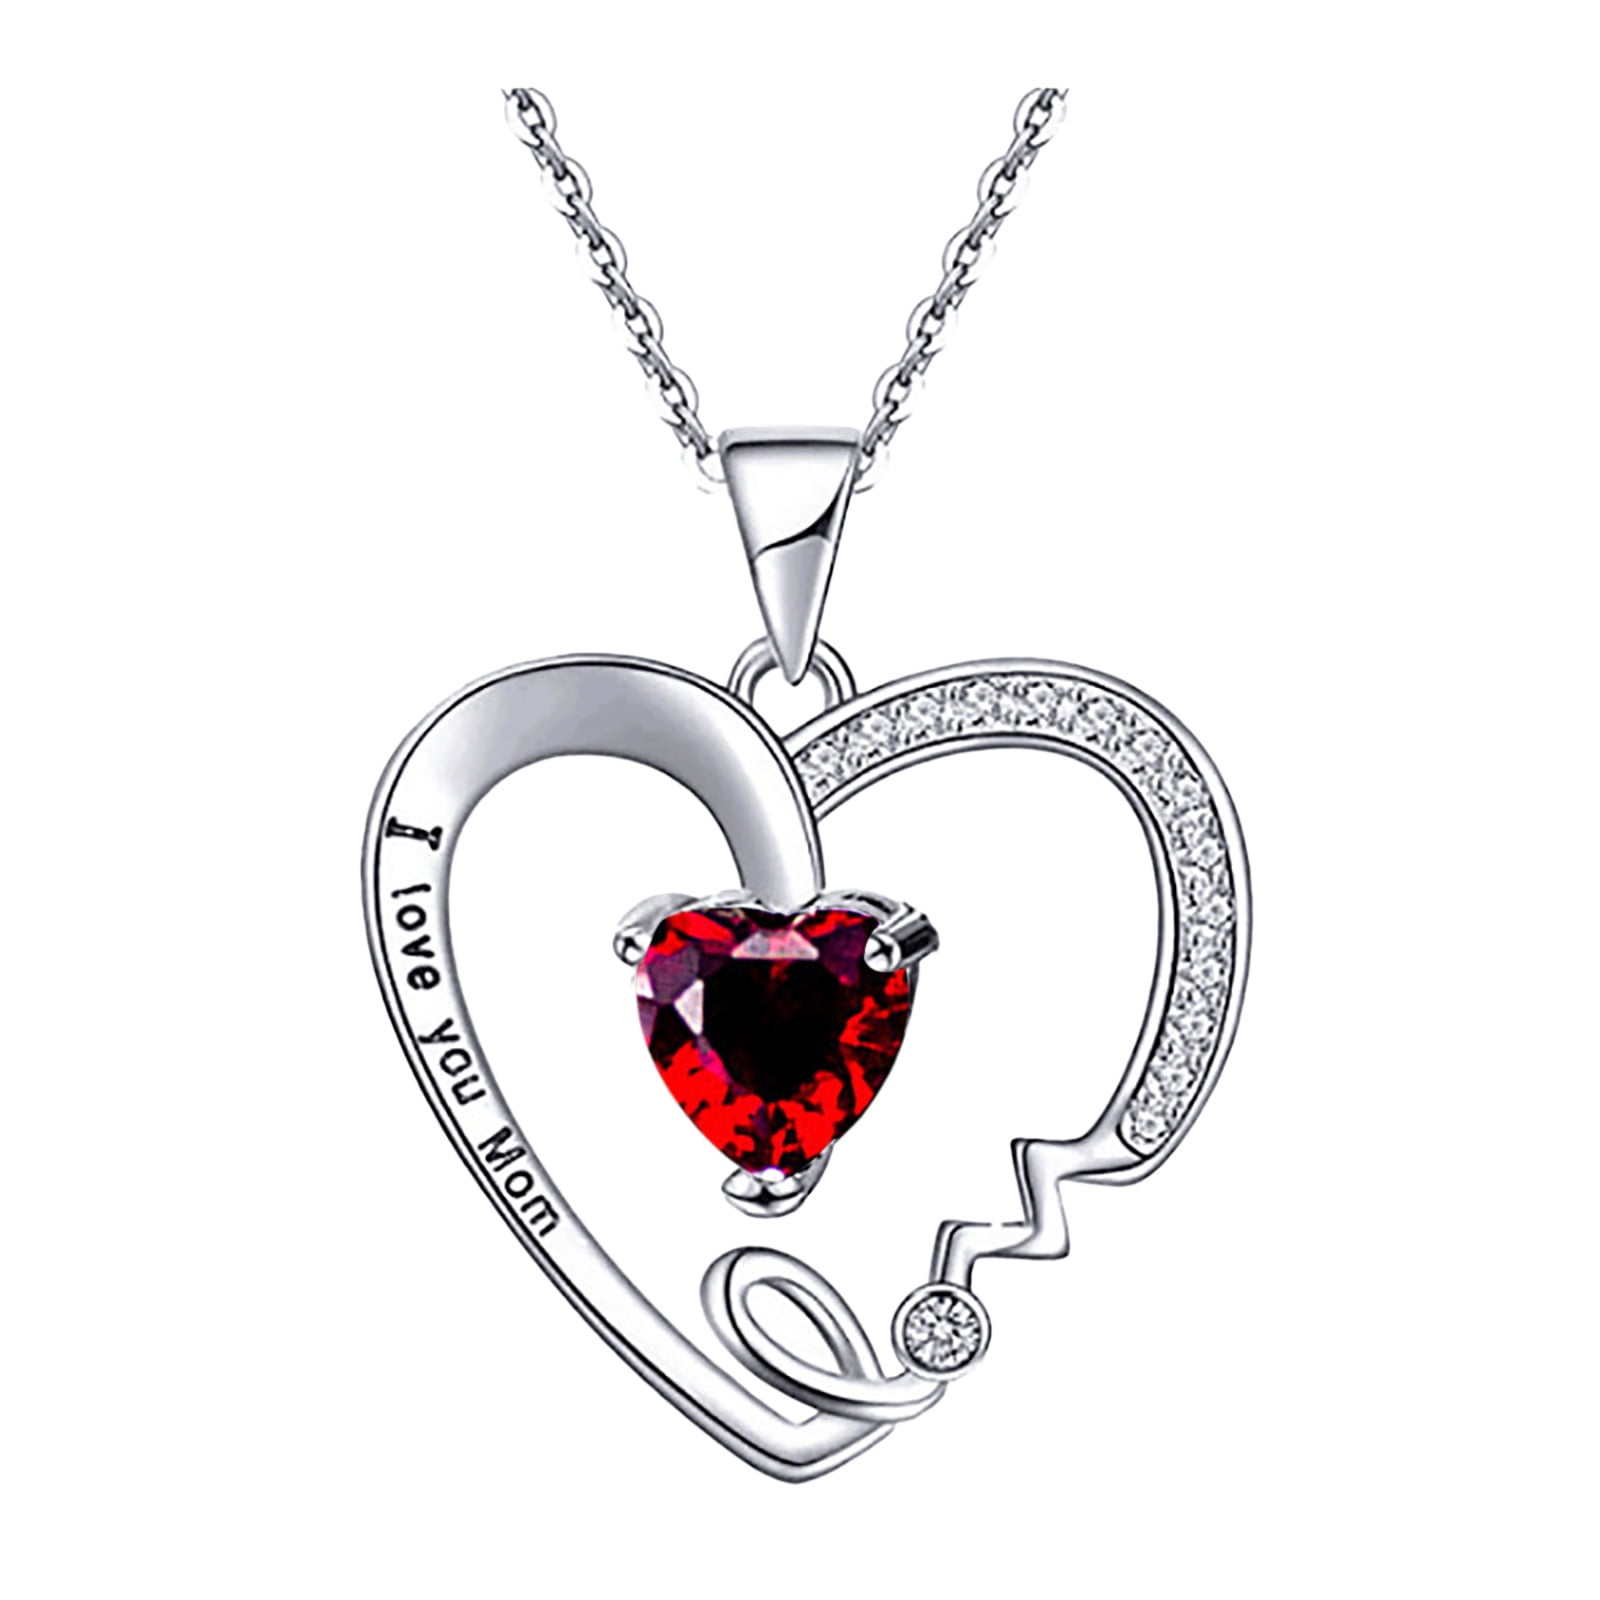 Women's Stainless Steel "I Love You Mom" Heart Pendant Necklace Mothers Day Gift